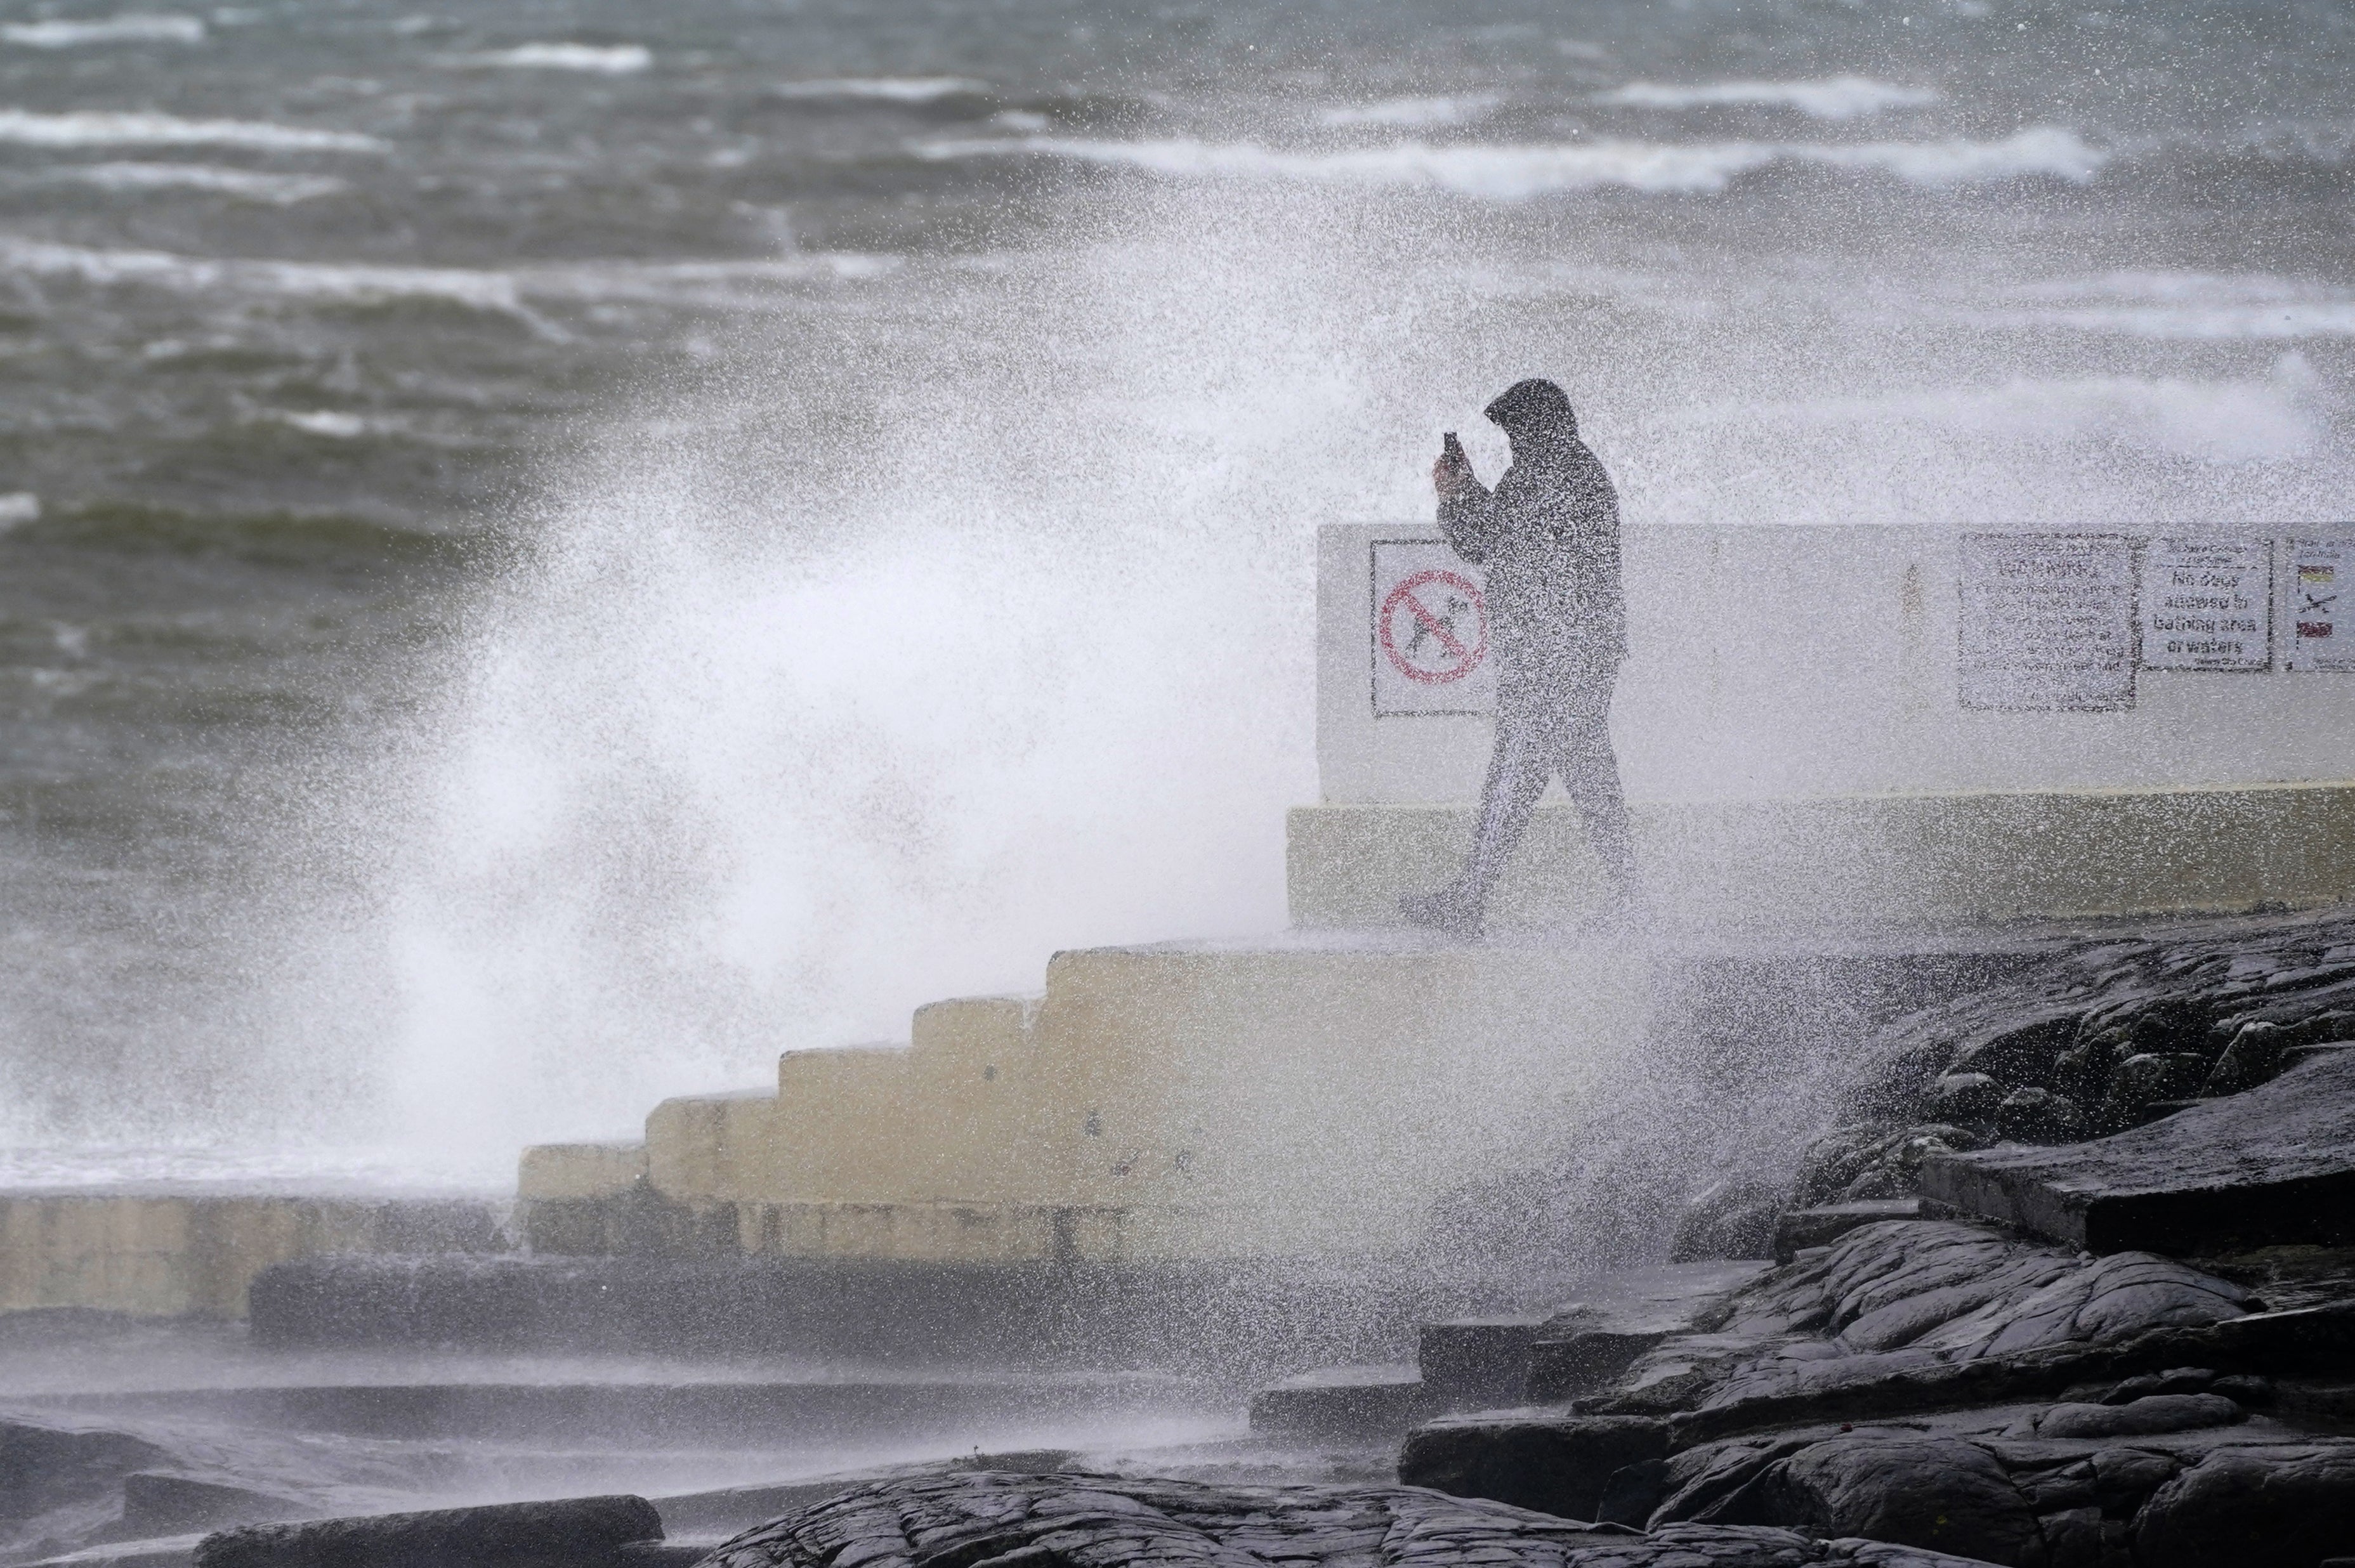 A man takes photos of the waves at Blackrock Diving Board, Salthill, Co. Galway